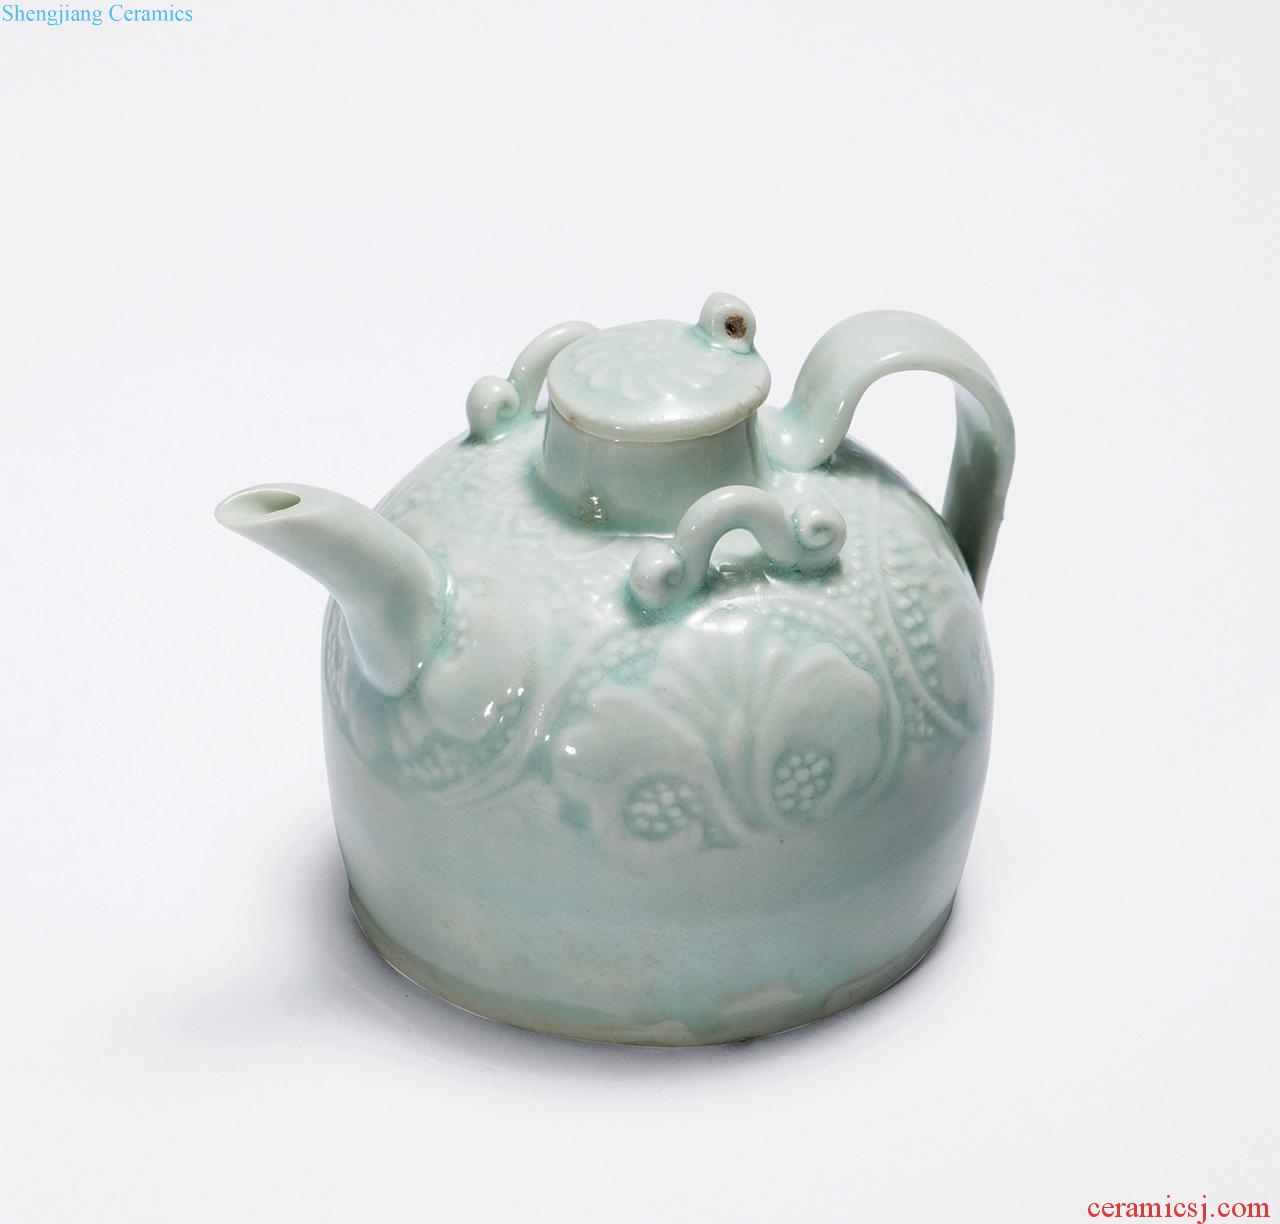 Song dynasty (960-1279), small ewer green printing craft